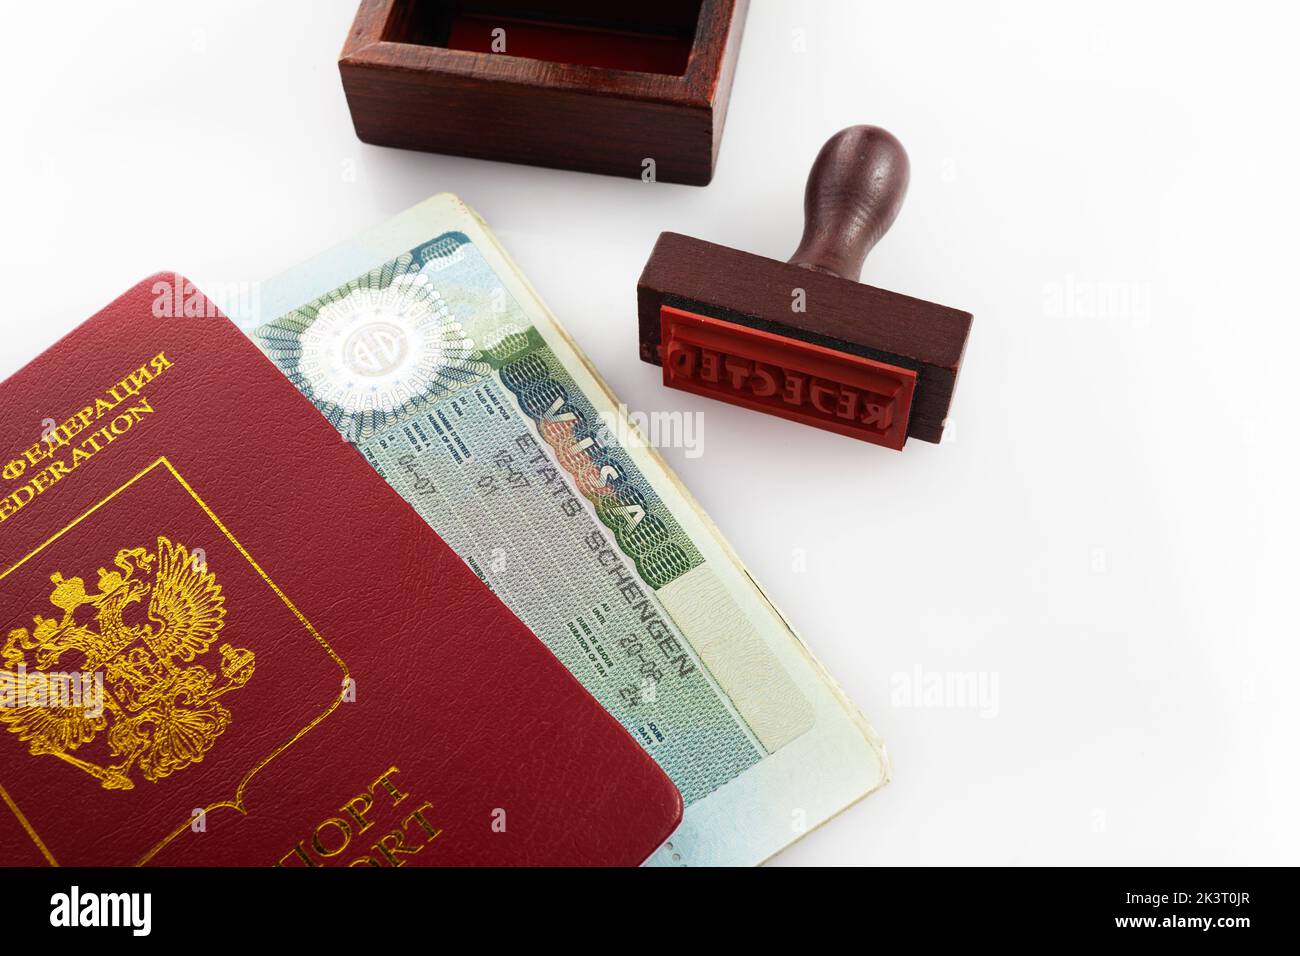 Stop russian illegal migration concept, Prohibition and suspension of visas Stock Photo